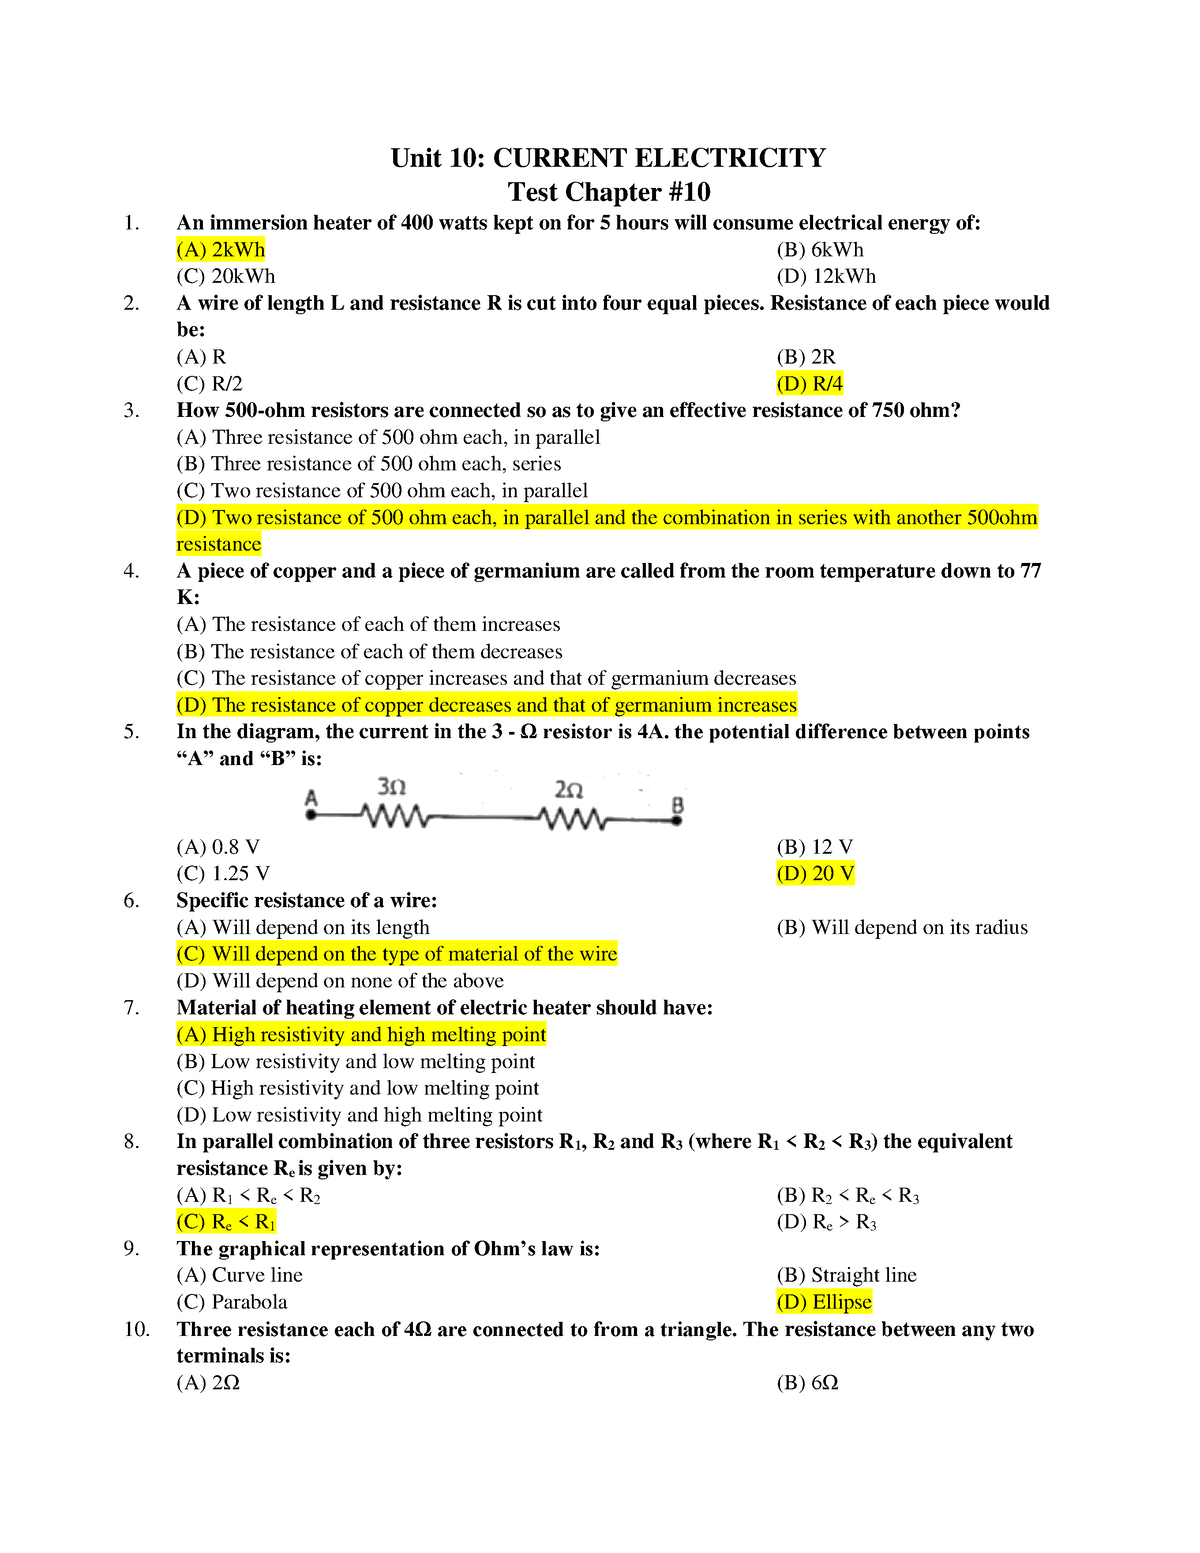 Chapter #10 - Unit 10: CURRENT ELECTRICITY Test Chapter An immersion ...